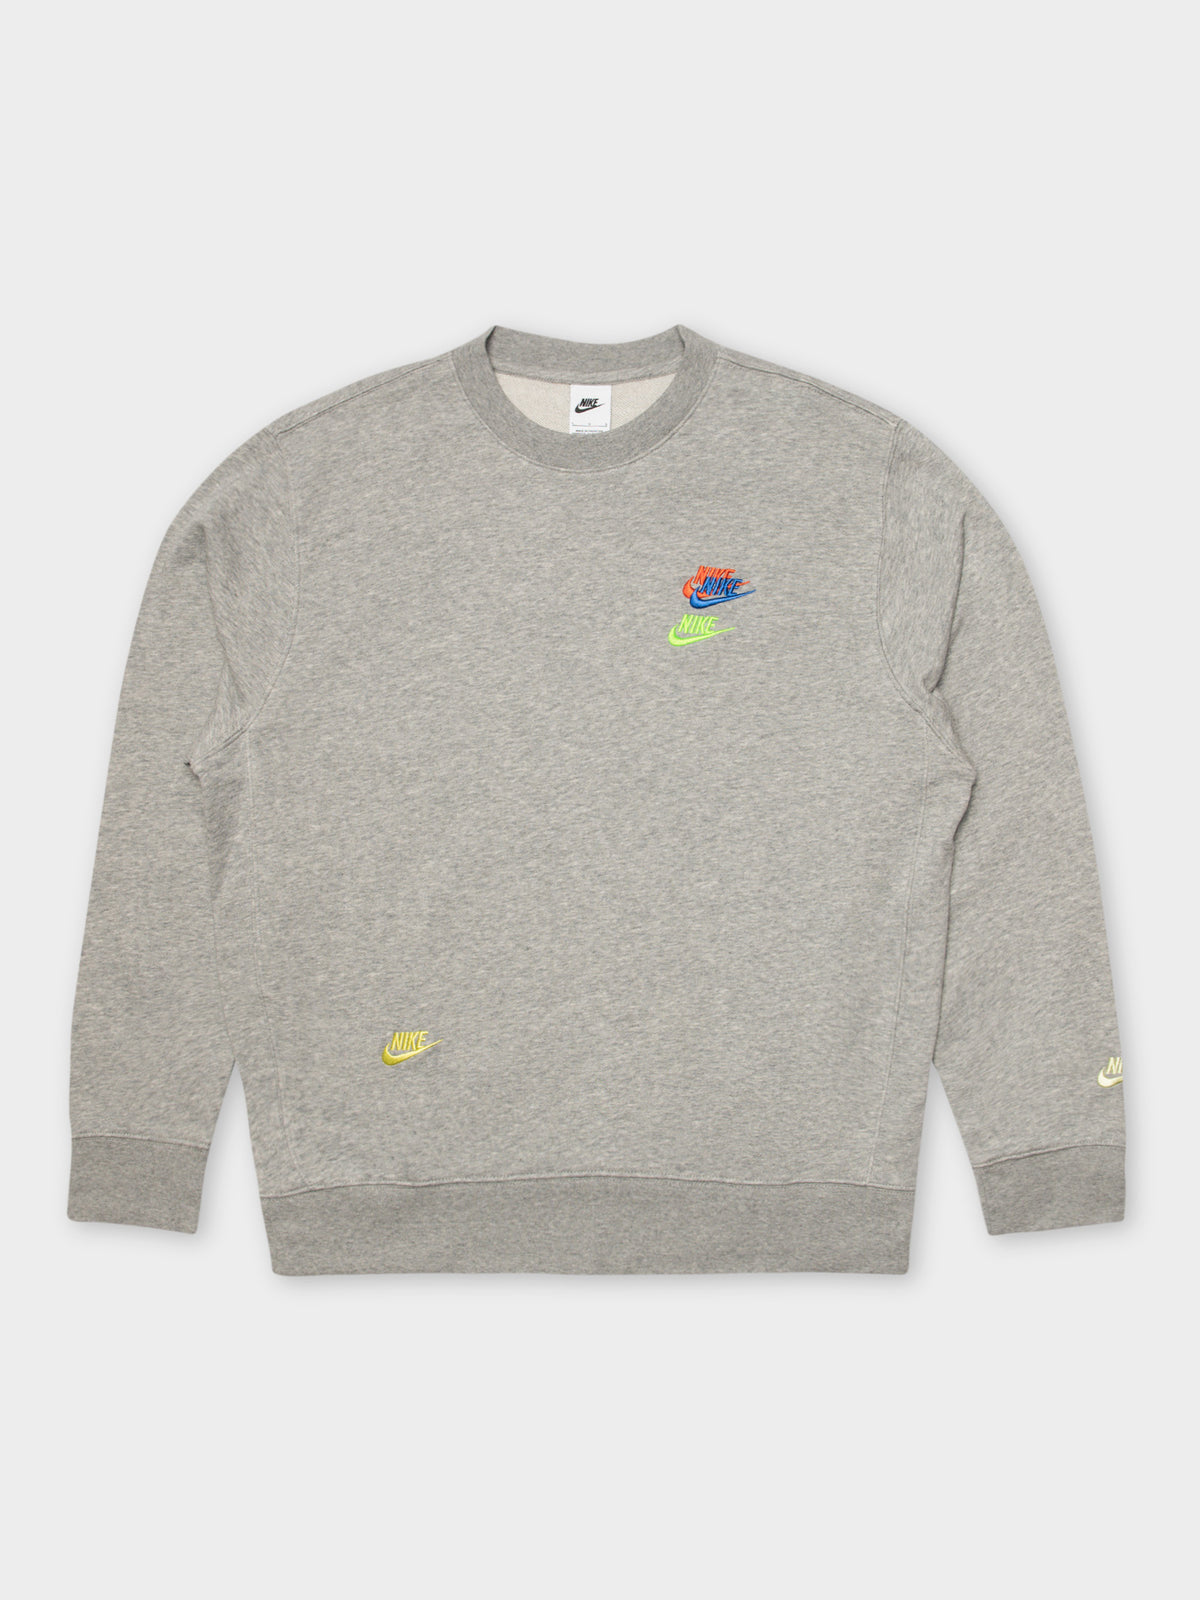 NSW Essentials French Terry Crew in Grey Heather